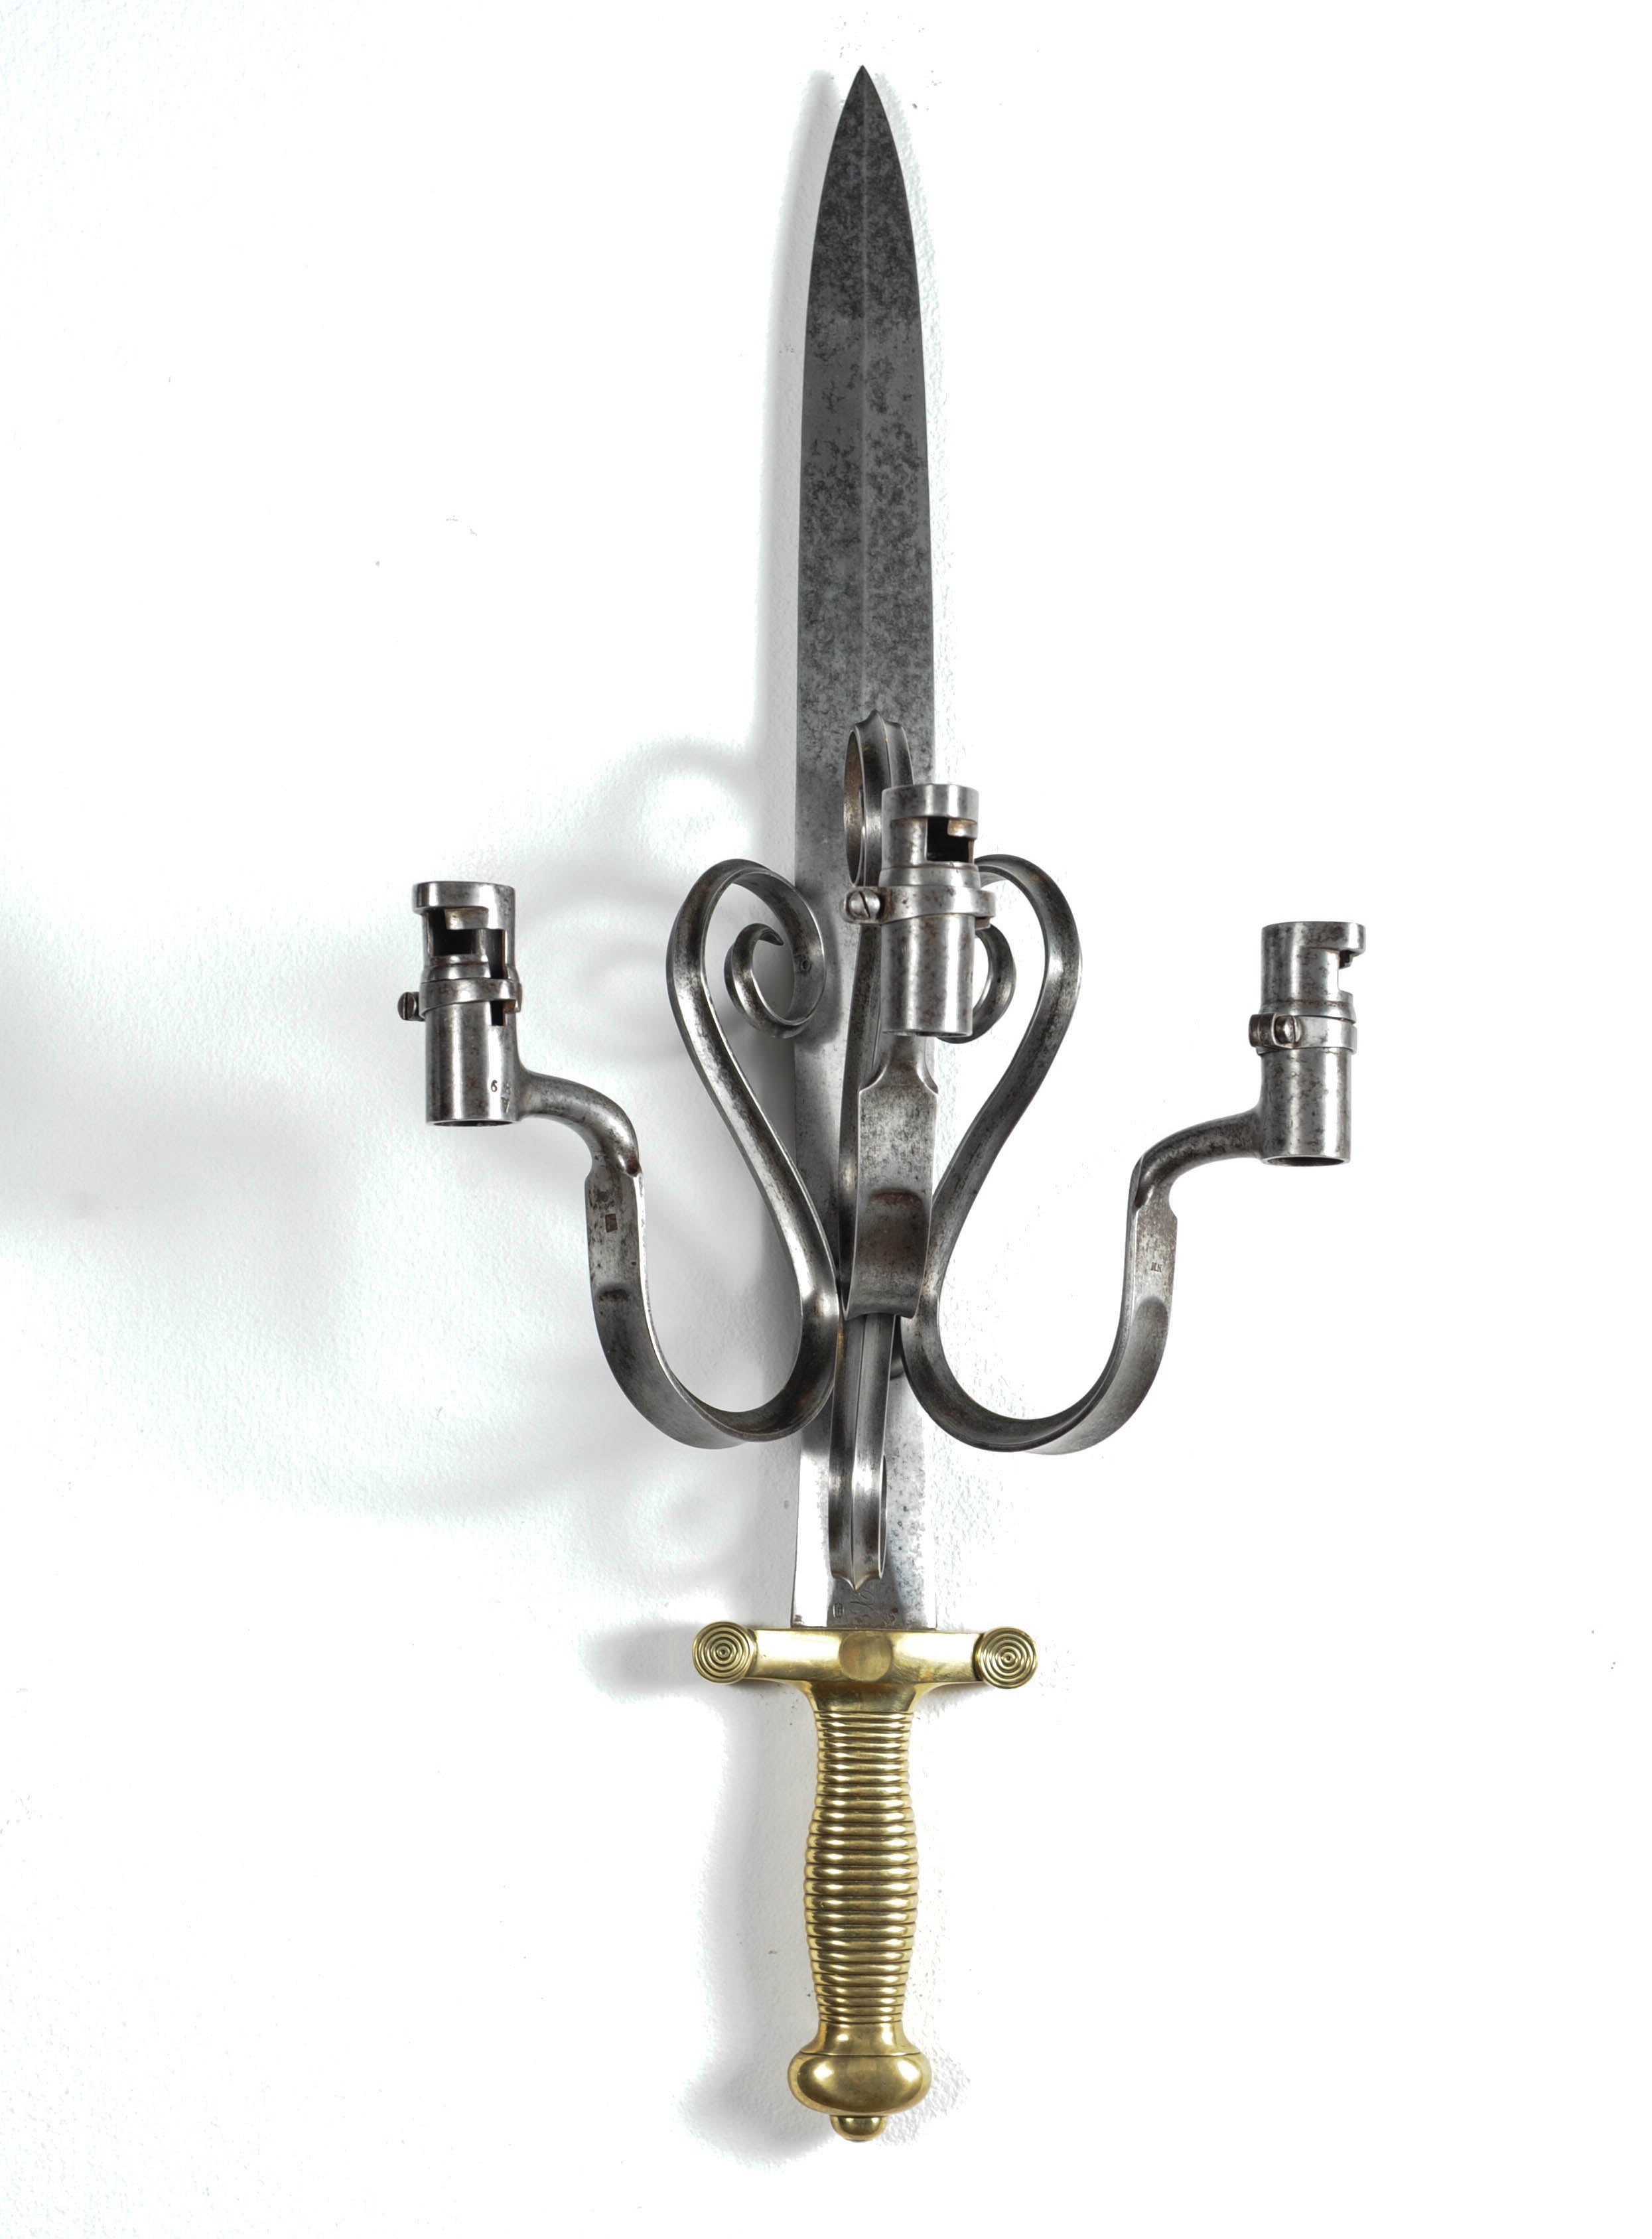 Pair of Appliques/Candle Sconces Made of Antique Swords and Bayonets For Sale